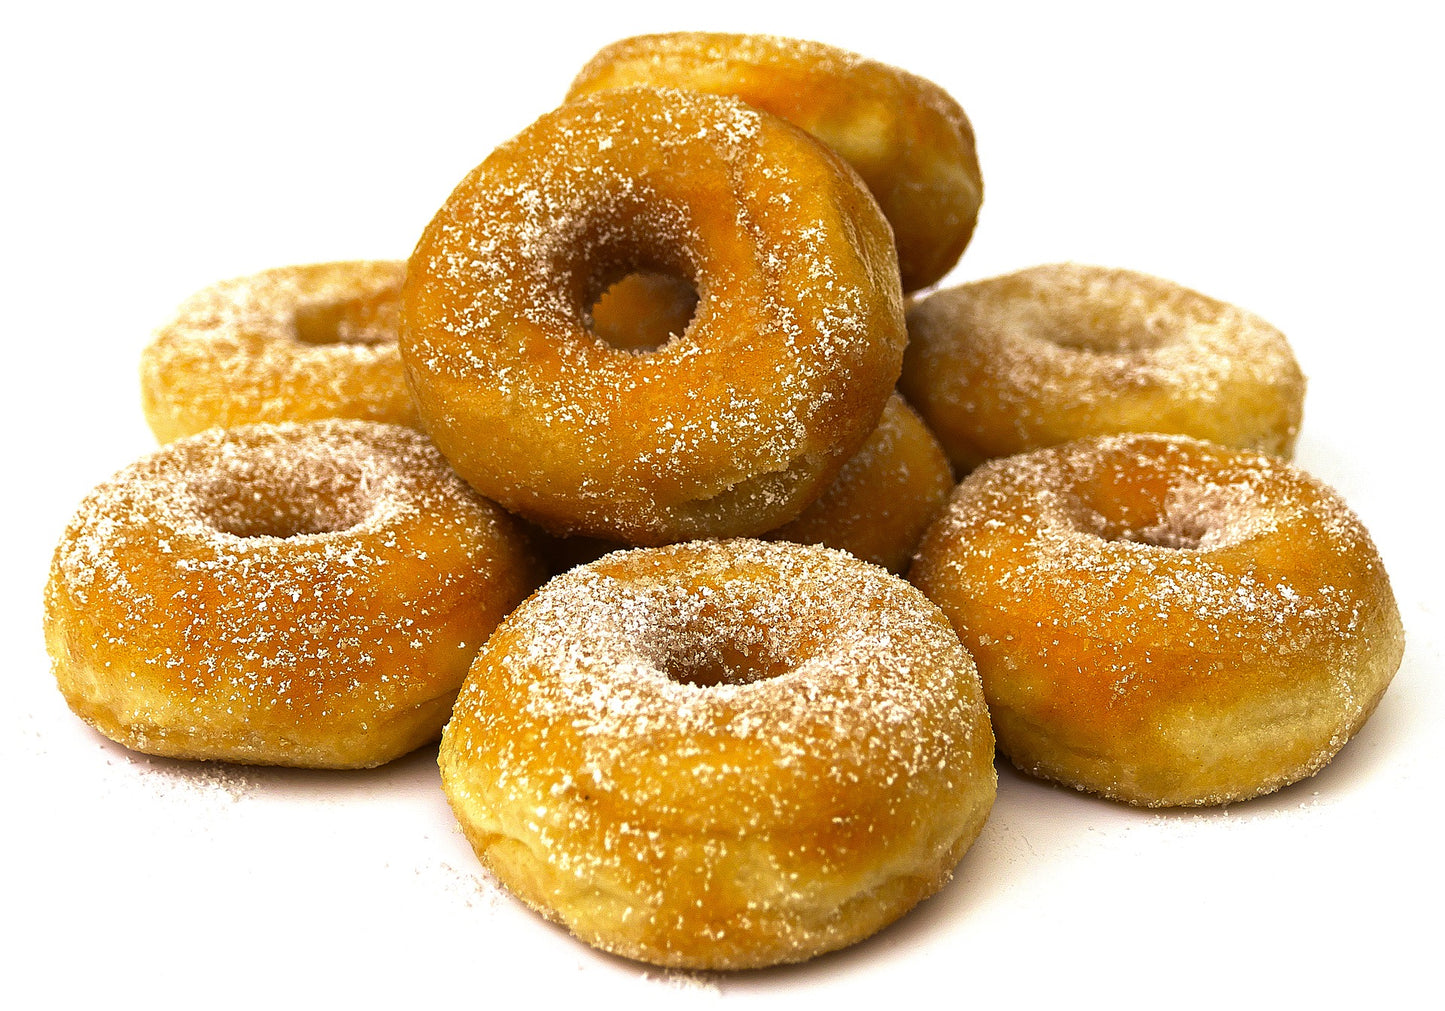 CINNAMON SUGAR DONUT - The perfect combination of freshly crushed cinnamon and sugar crystals on top of a delicious doughnut. A treat that will leave your taste buds satisfied! Available in Perfume Oil, Body Spray, Body Oil